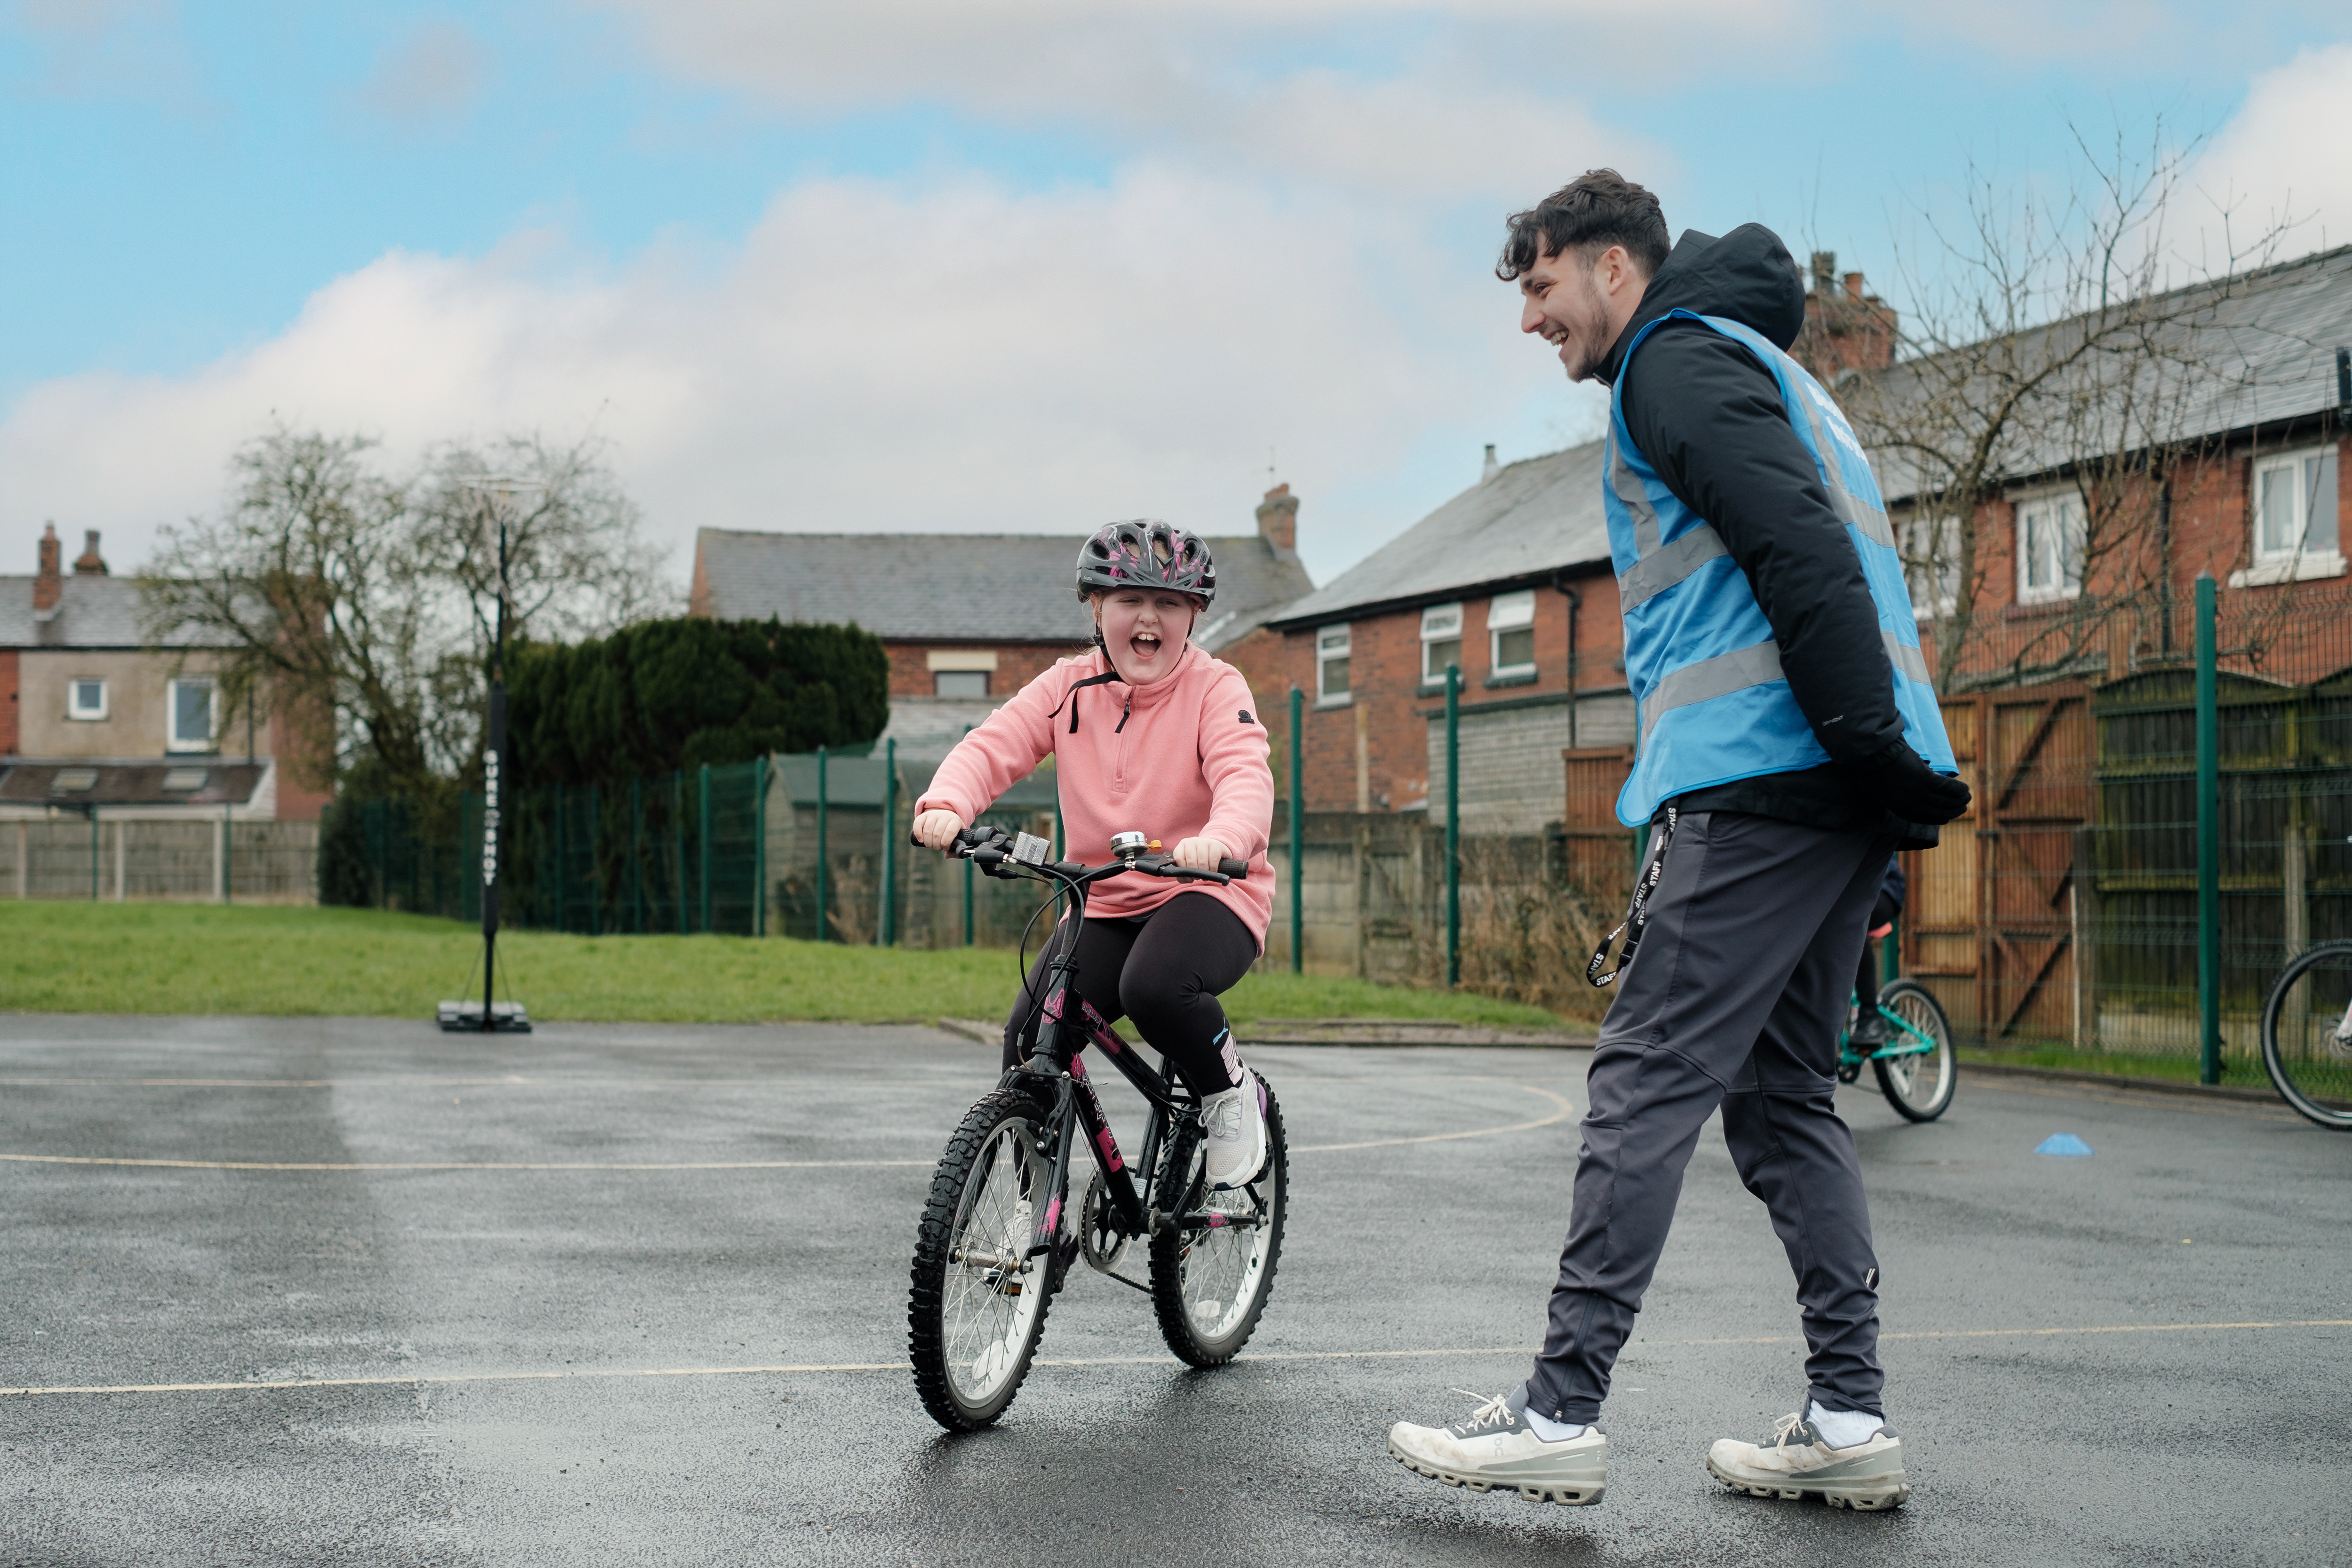 A young trainee is riding her bicycle in a school playground during a Bikeability Level 1 session. Her Bikeability instructor is standing encouragingly beside her. They are both laughing happily and the rider is wearing a safety helmet.